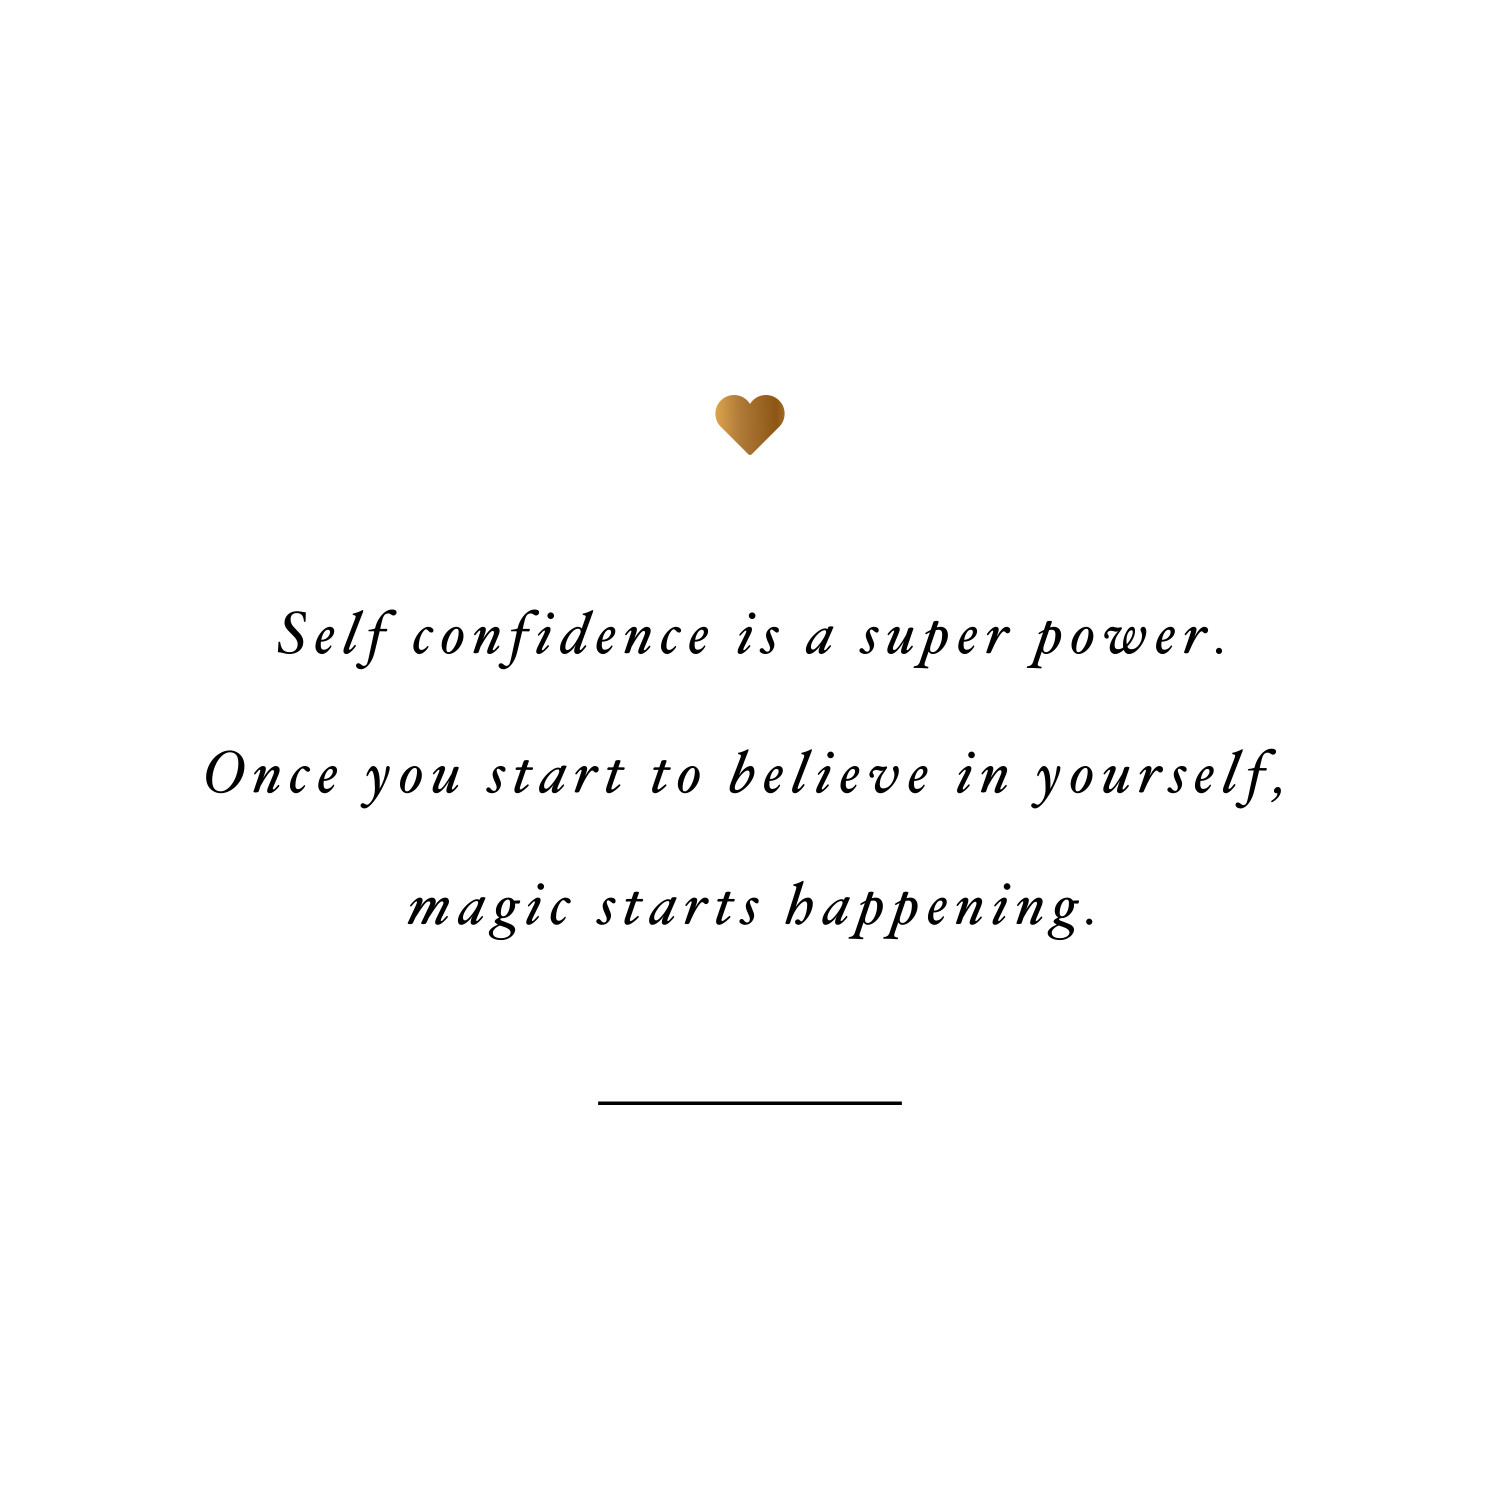 Self confidence is a super power! Browse our collection of inspirational health and fitness quotes and get instant exercise and training motivation. Transform positive thoughts into positive actions and get fit, healthy and happy! https://www.spotebi.com/workout-motivation/self-confidence-is-a-super-power-exercise-and-training-motivation/